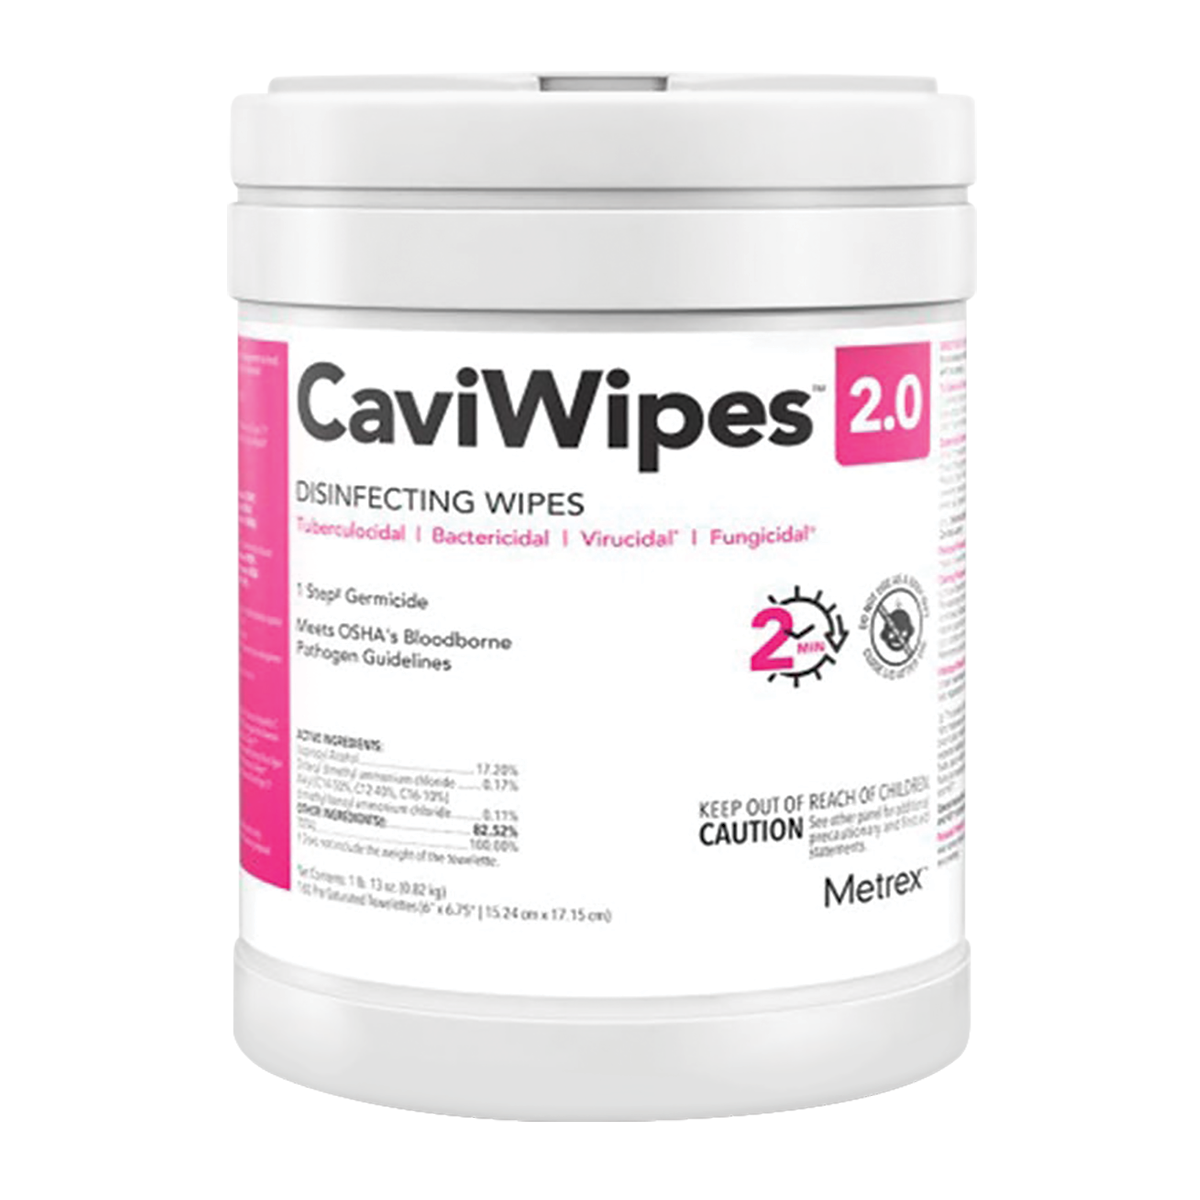 CaviWipes 2.0 Disinfectant Wipes